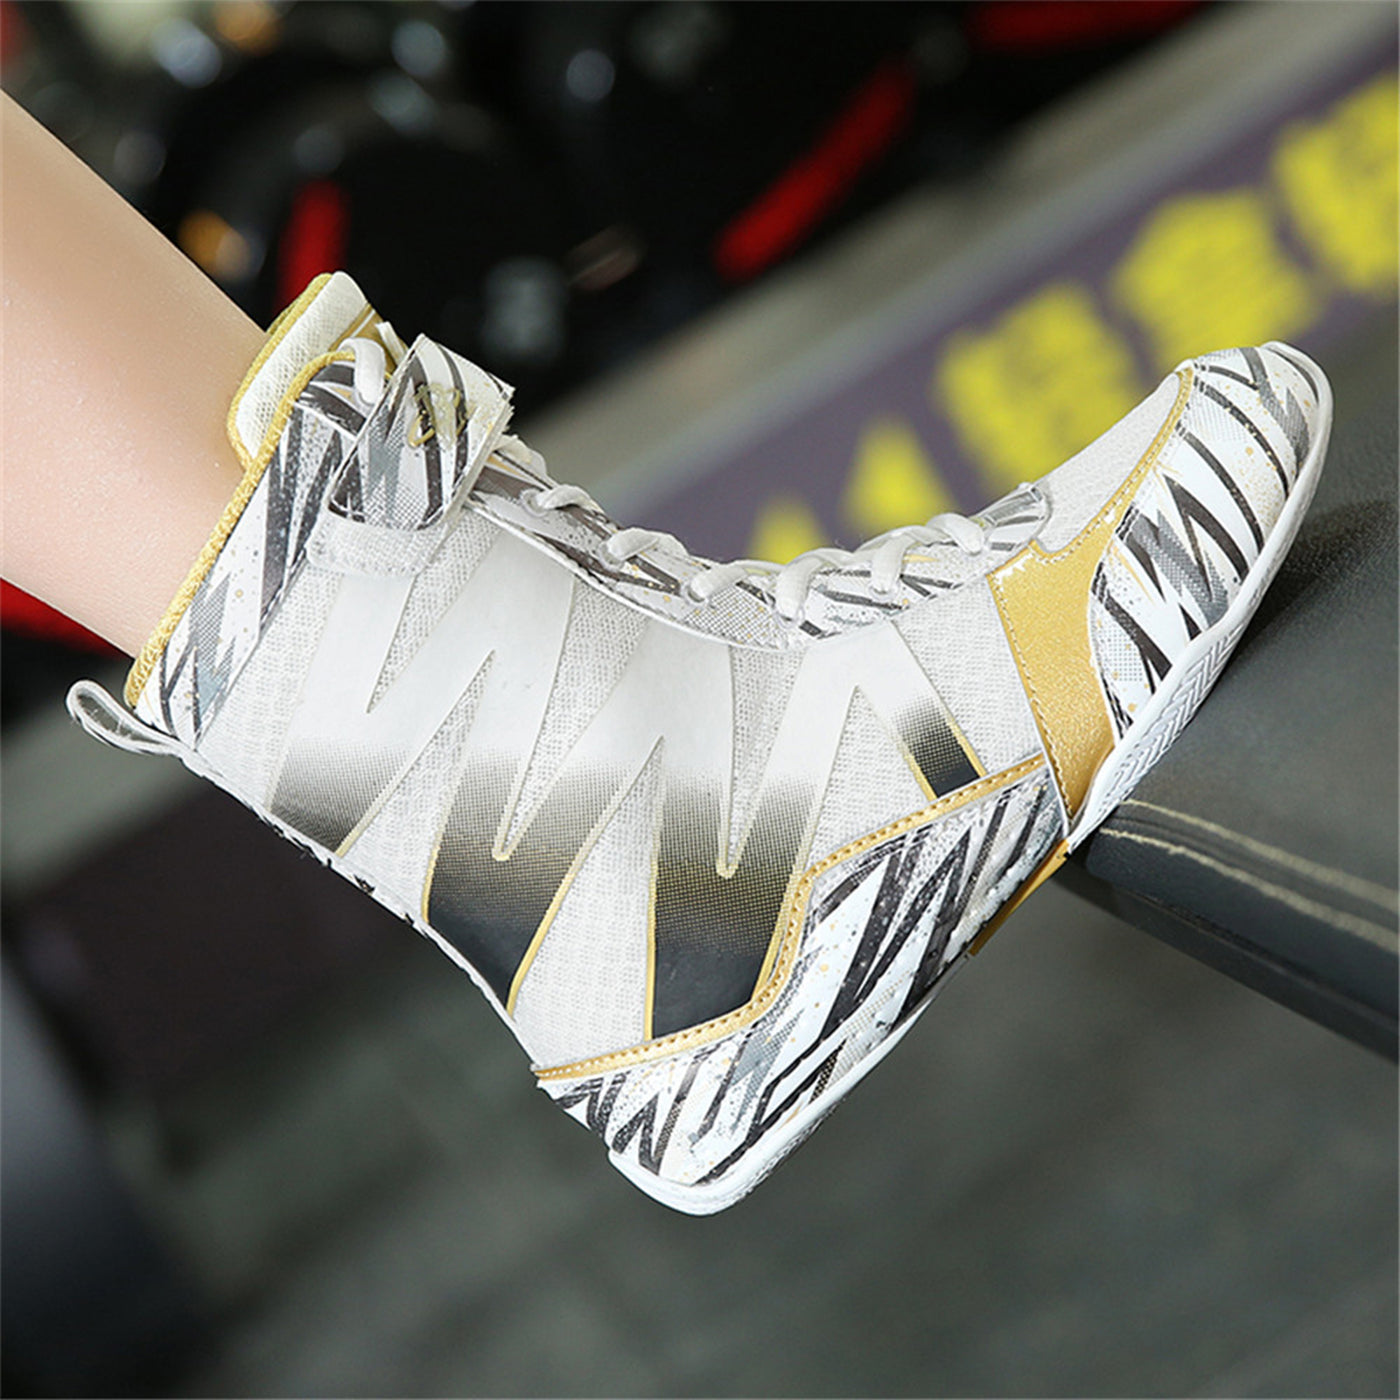 B LUCK SHOE Boxing Shoes for Kids, Youth Boxing Boots Hi-top Breathable Wrestling Shoes LS-218 WHITE